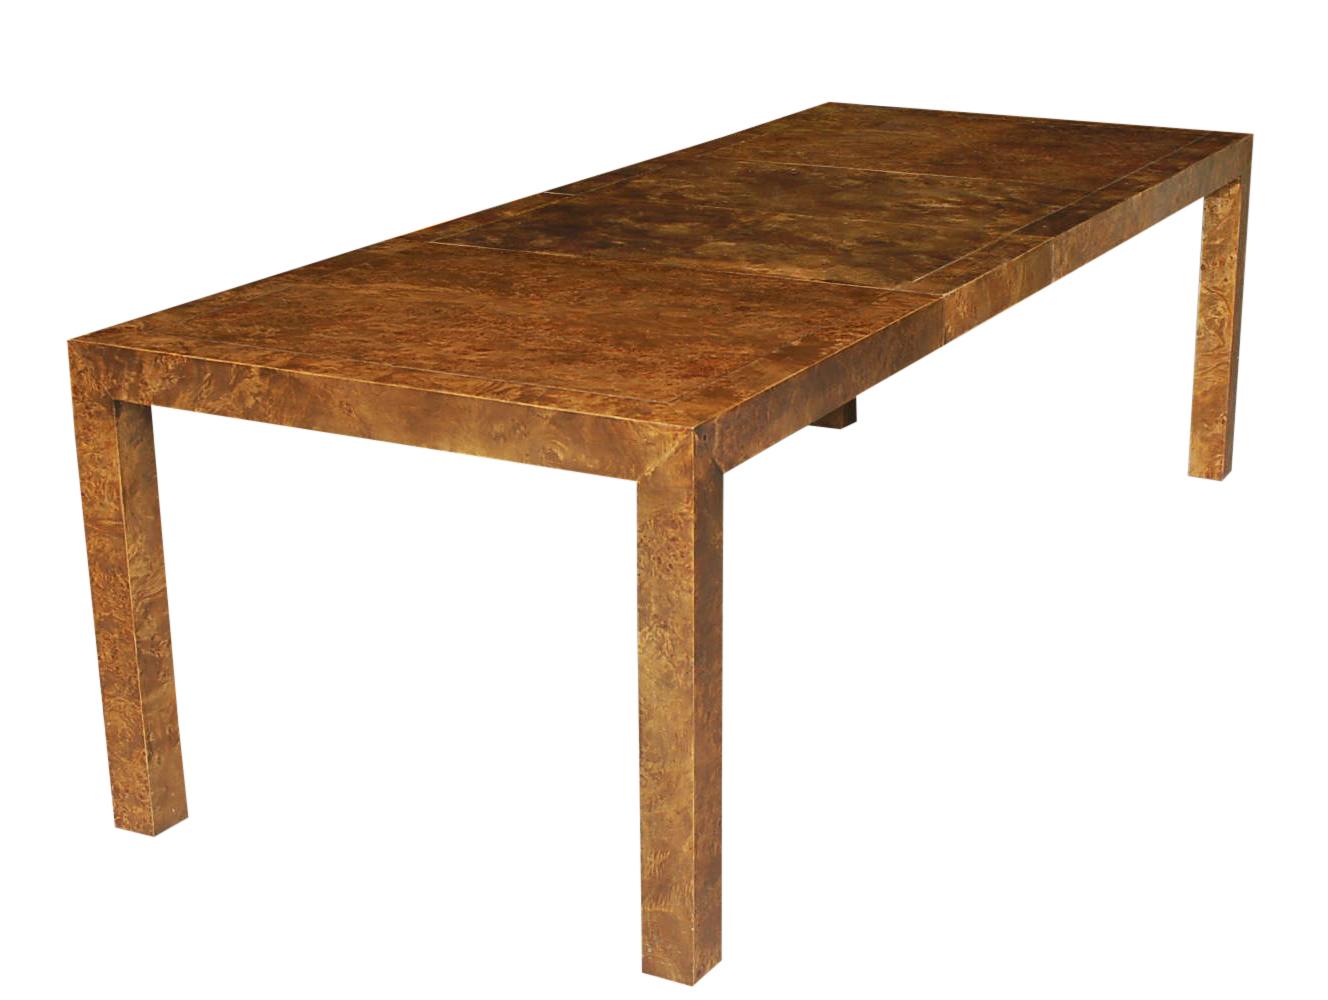 American Mid-Century Modern Parsons Dining Table or Conference Table in Burl Wood